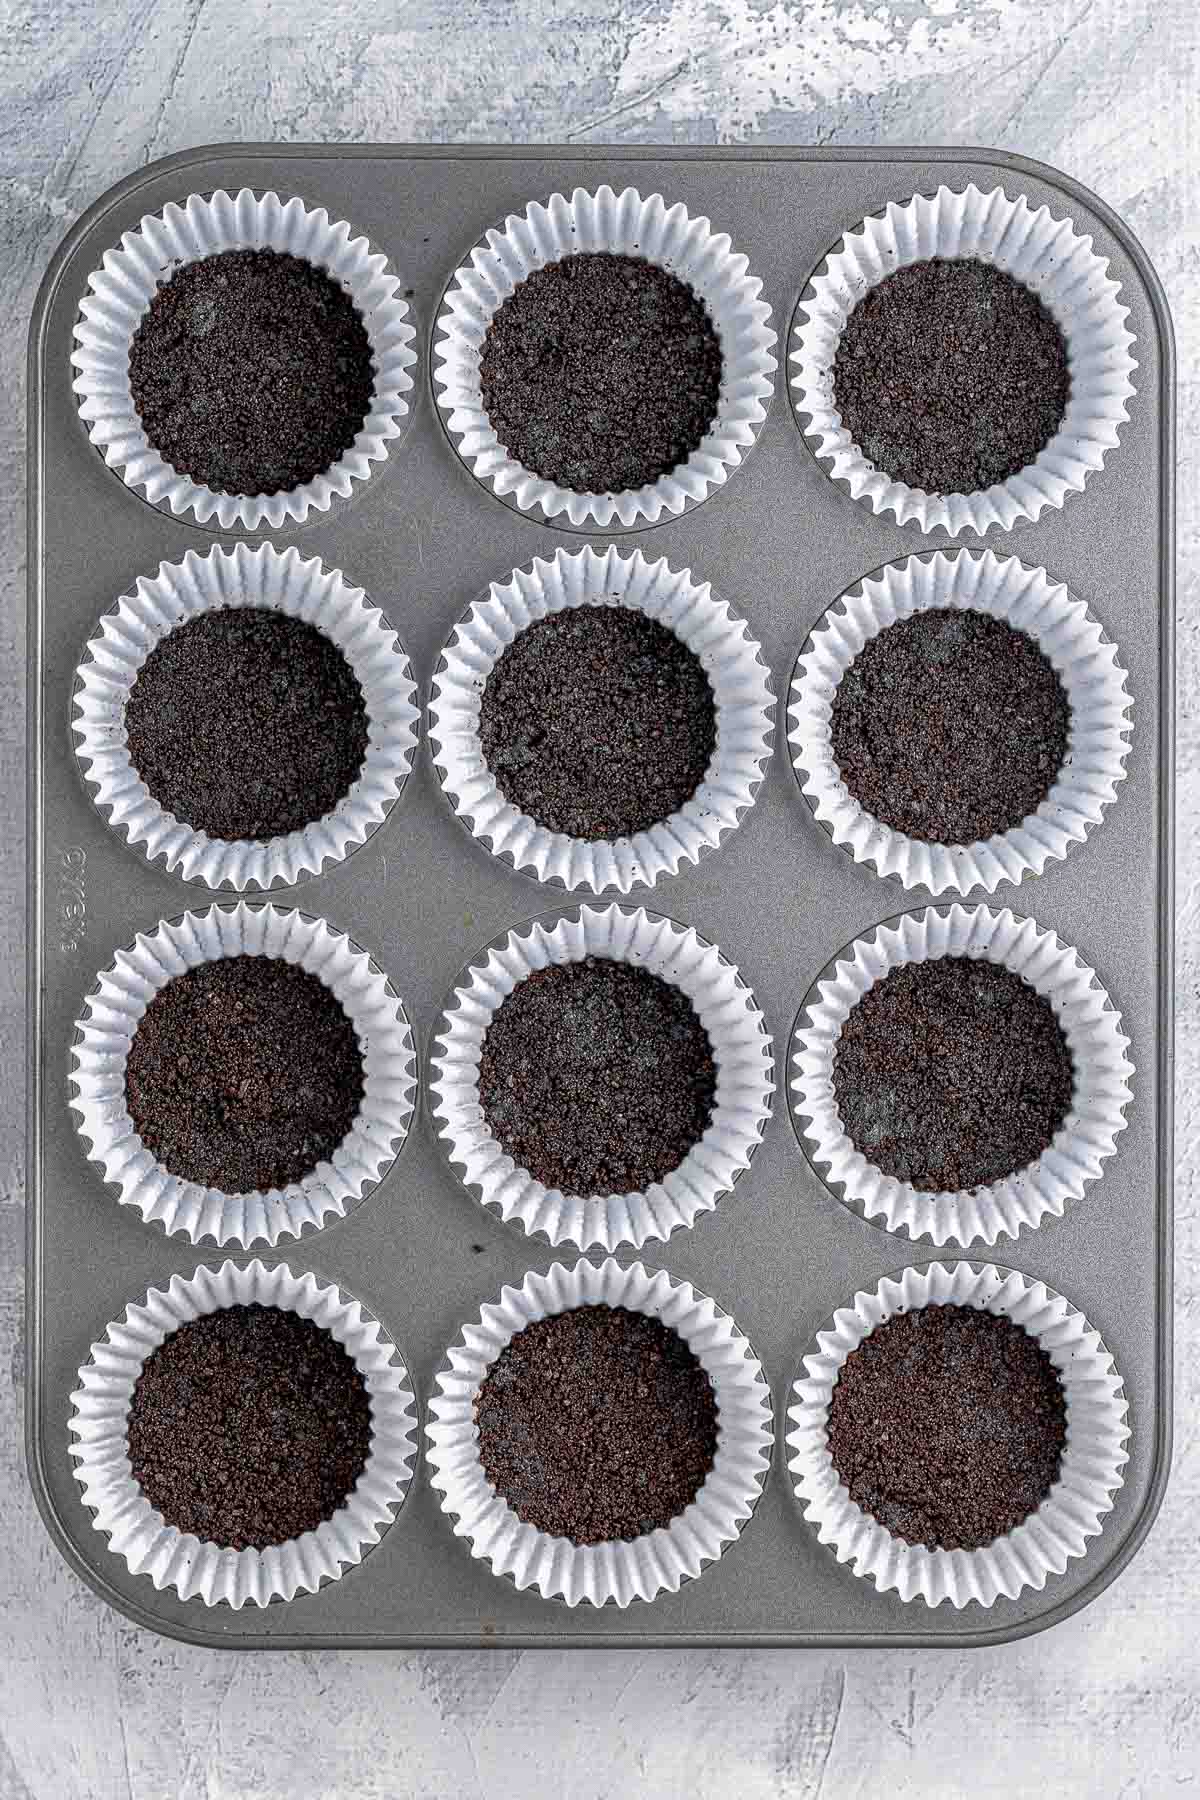 Oreo cookie crust in white muffin liners.